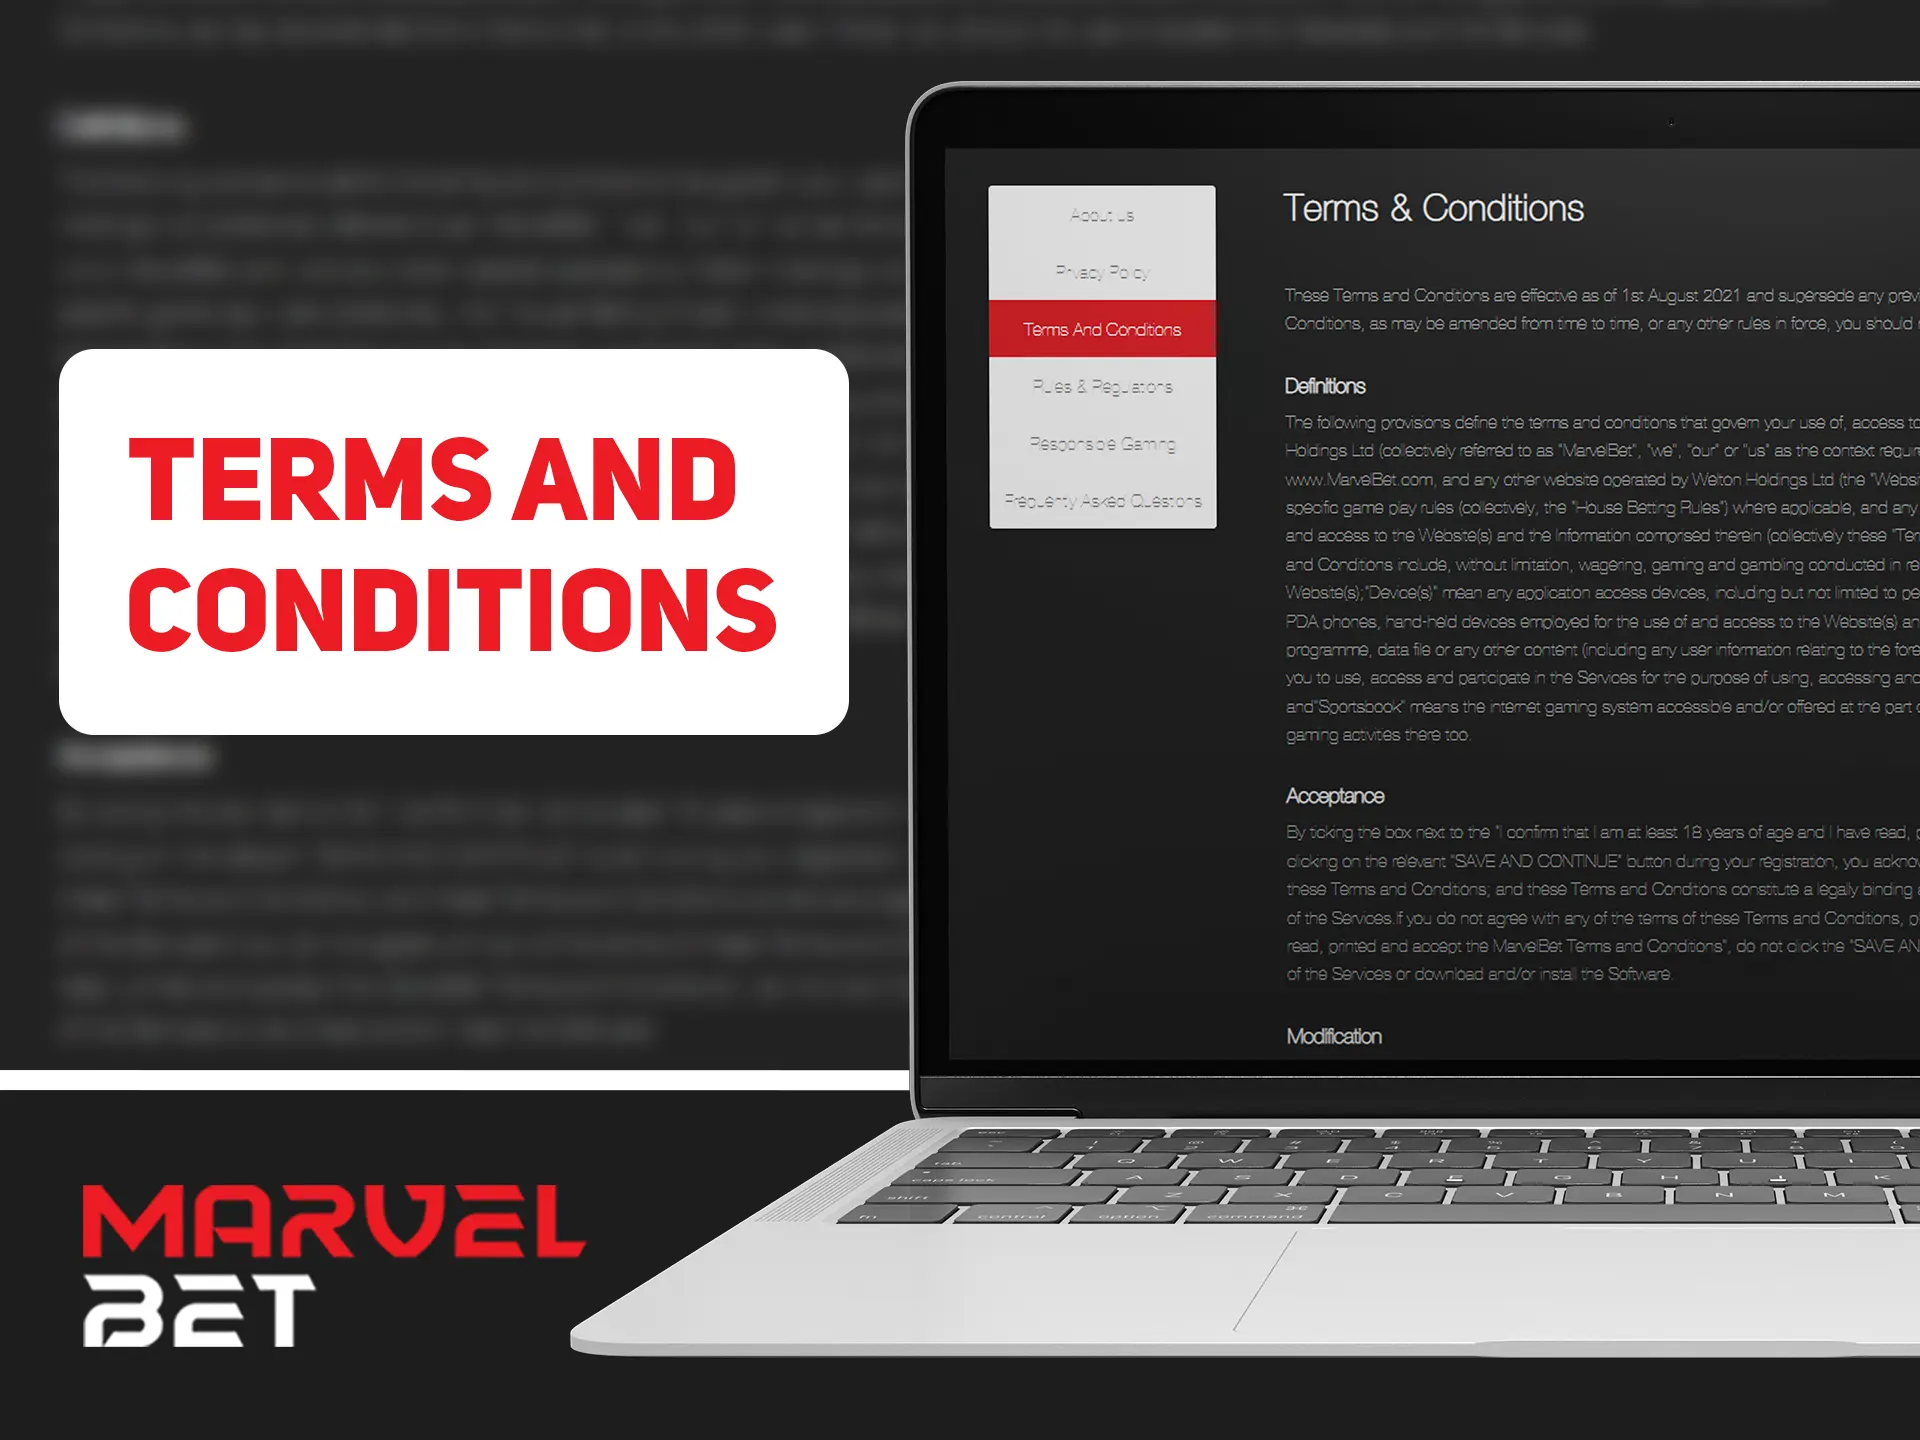 Read Marvelbet terms and conditions before making bets.